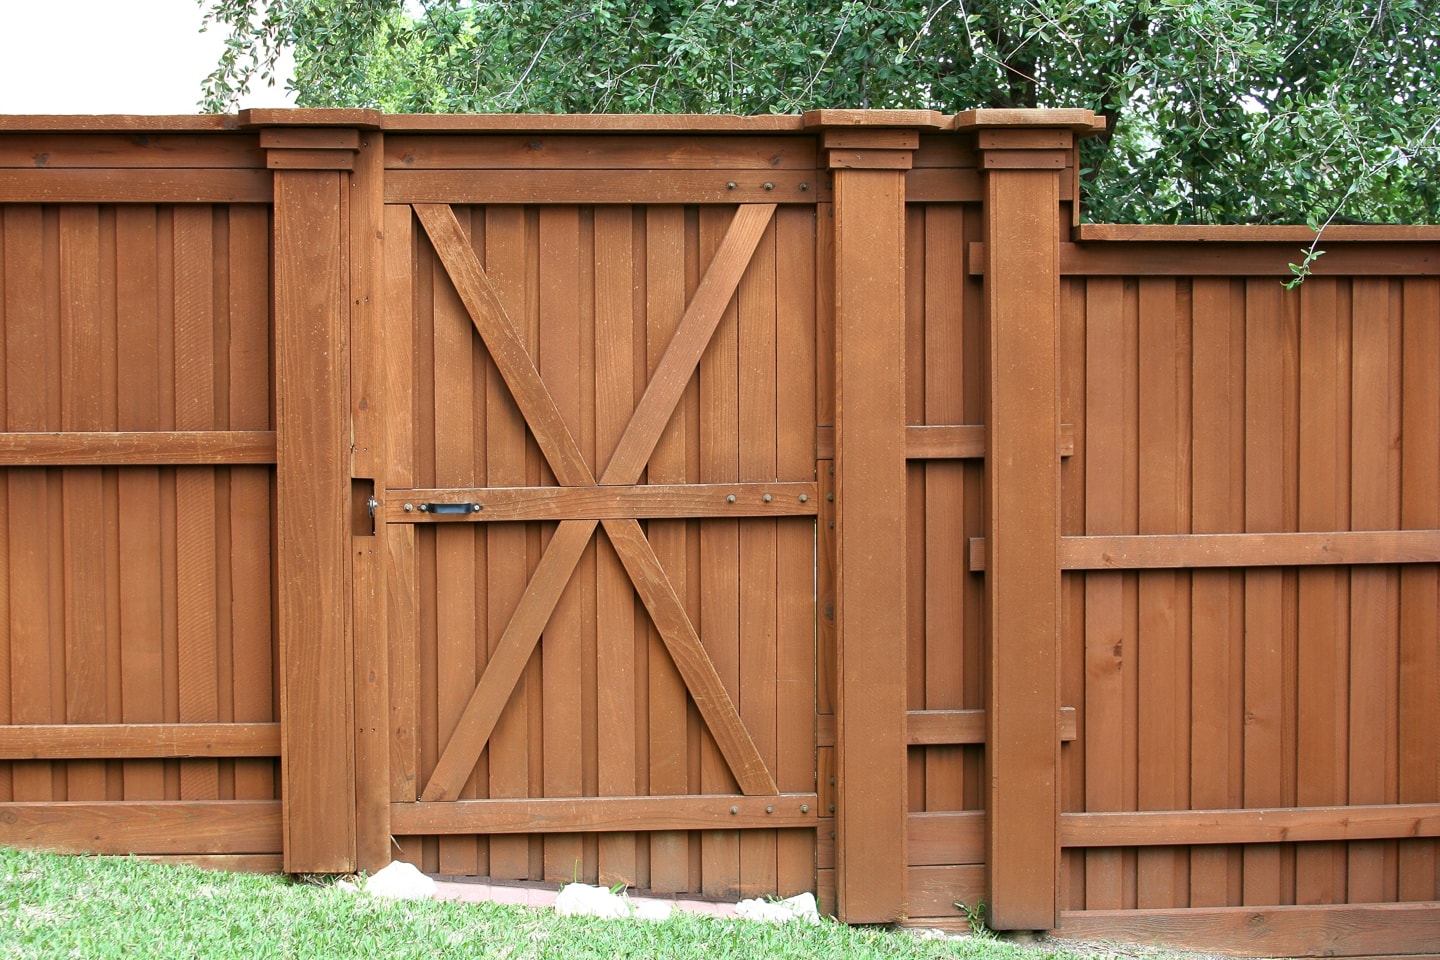 Solid wood cedar fence with matching gate